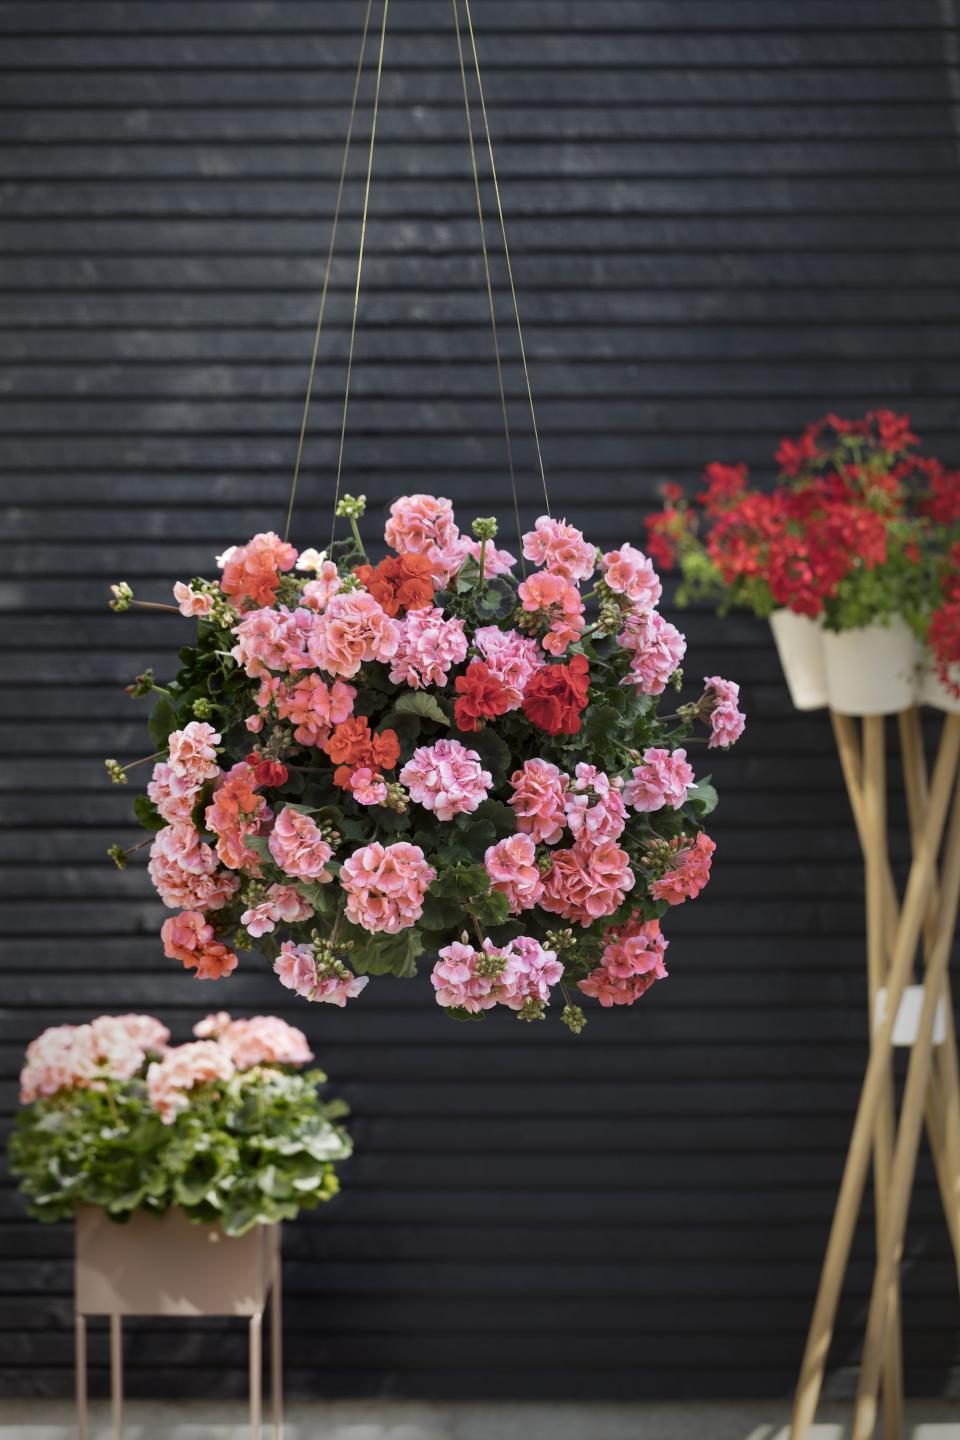 <p><strong>They're a much-loved garden plant, but how much do you really know about the geranium? </strong></p><p>Officially known as pelargonium, these plants bloom profusely throughout summer and into autumn – whether grown on a balcony, in a window box, hanging basket, container or in a traditional garden bedding display.</p><p>With its gorgeous green leaves and fabulous vibrant flowers, these summer beauties are not just bursting with colour but are low maintenance too, which is what makes them so popular, especially for beginners. There are more than 250 species, from zonal geraniums that form the backbone of summer bedding, to trailing geranium (ivy-leaved types) perfect for hanging baskets, and beautiful regal geraniums which are known for their showy, ruffled flowers.</p><p>An estimated 40 million geraniums are planted in UK gardens each year, and these strong, trustworthy and dependable plants can be enjoyed for three whole seasons every year. <br></p><p>'Geraniums provide such great value in outdoor containers and window boxes but also in the borders,' says <a href="https://www.claudiadeyongdesigns.com/" rel="nofollow noopener" target="_blank" data-ylk="slk:Claudia De Yong;elm:context_link;itc:0;sec:content-canvas" class="link ">Claudia De Yong</a>, landscape and garden consultant. 'They add a splash of colour right through the summer months, their lush foliage adds texture in the garden and they just keep on giving even coping with adverse weather conditions. Geraniums also make great companions for under planting the bare stems of roses or even a grape vine. They also go well with Lobelia and Alyssum.'</p><h4 class="body-h4"><strong>Zonal pelargoniums </strong></h4><p>Tough, dependable and drought-resistant, Zonal geraniums form upright, bushy plants that are renowned for slug-resistance. With single, semi-double and double-flowered varieties available, zonal geraniums are a good choice for planting together in bedding schemes and for creating containers that’ll be a riot of colour all season.</p><h4 class="body-h4">Ivy-leaved pelargoniums</h4><p>These beautiful cascading ivy-leaved geraniums ('ivy-leaved' is a reference to the shape of their fleshy leaves, which resembles the foliage of this traditional climber) give baskets and pots longevity, flowering late into the season – and long after other summer bedding favourites.</p><h4 class="body-h4">Regal pelargoniums</h4><p>Regal geraniums can burst into bloom earlier than zonal types – and they’ll carry on with the spectacle right through the season. Regals are showy, statuesque plants, known for their ruffled flowers. These plants are mostly single-flowered, but bicolour shades are available. </p><h4 class="body-h4">Scented-leaf pelargoniums</h4><p>Scented-leaf geraniums offer a host of fragrances from citrus to lemon and rose. Scented varieties can produce smaller flowers than other types, but these plants pack a punch with their fragrance (they're at their most intense when allowed to bask in sunlight), and there's a wide choice of foliage styles from variegated to lobed.<br></p><h4 class="body-h4">Angel pelargoniums</h4><p>Angel geraniums are a smaller version of regal types. Compact, bushy and cheerful, they’re perfect for small spaces, such as hanging baskets and smaller containers. The darker markings on the flowers' upper petals resembles the characteristic blooms of the much loved pansy and viola. Angels flower profusely (deadhead regularly to keep flowers coming) and they are always a winner in mixed planting schemes.</p><p>Here, <a href="https://www.instagram.com/mygeranium/" rel="nofollow noopener" target="_blank" data-ylk="slk:Pelargonium for Europe;elm:context_link;itc:0;sec:content-canvas" class="link ">Pelargonium for Europe</a>, an initiative to promote long-term sales of geraniums in Europe, reveal some little known facts about geraniums. Plus, we share some styling tips and craft ideas to help you decorate your home and garden with geraniums throughout the season.</p>